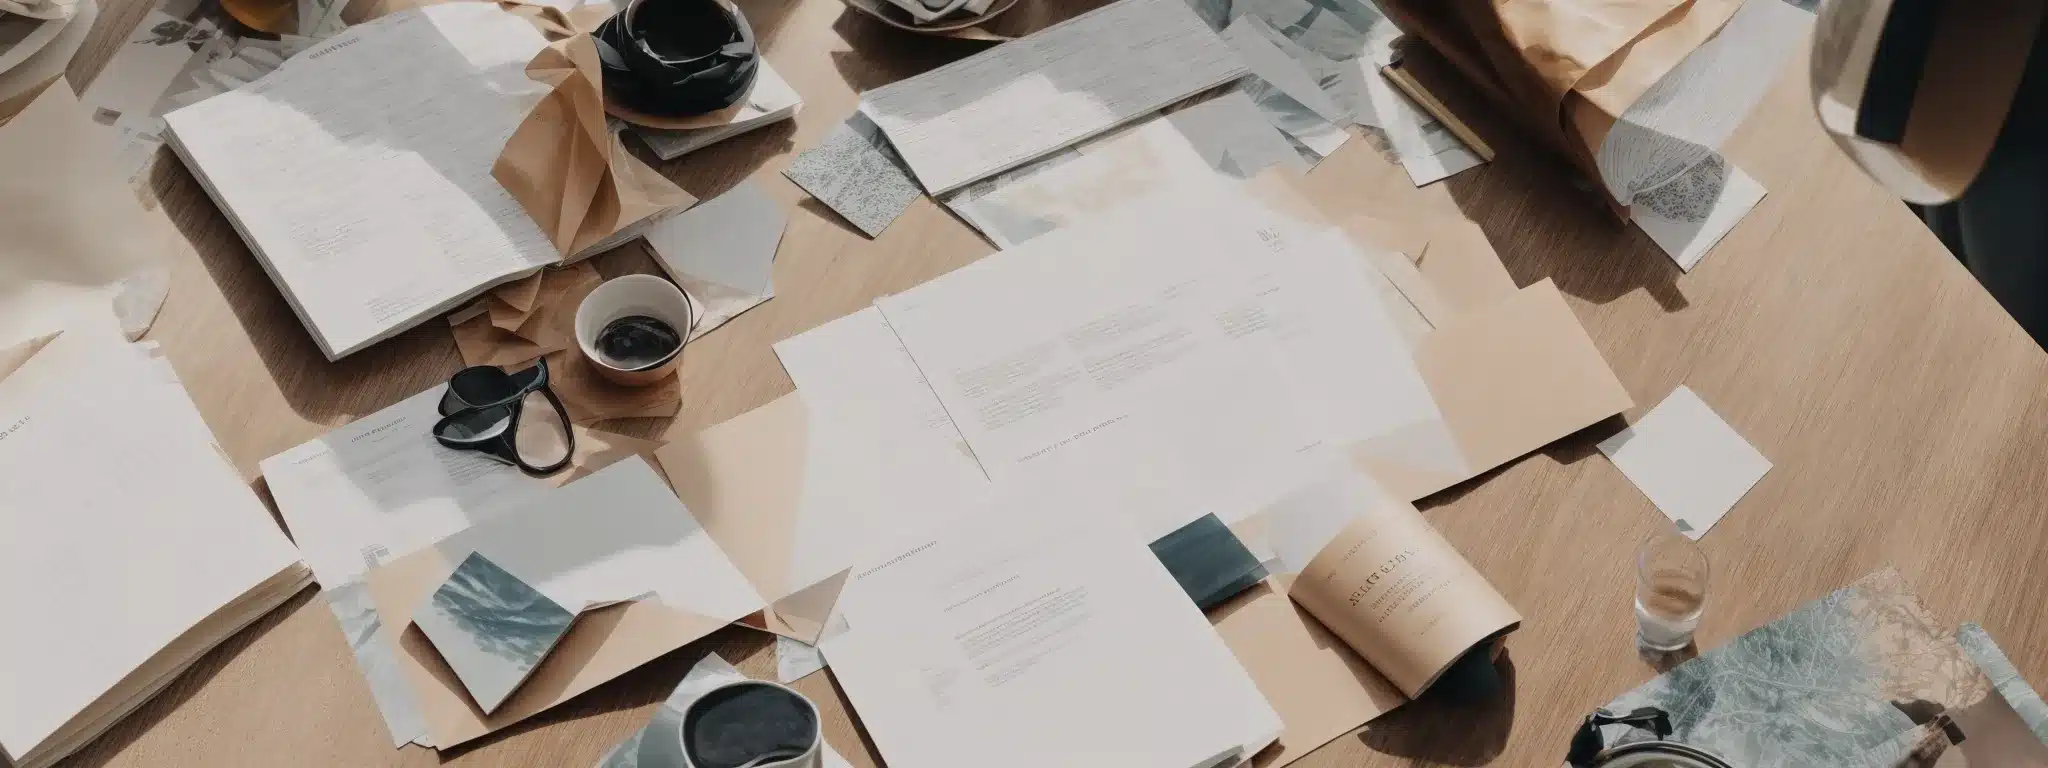 A Brand Strategist Examines A Comprehensive Marketing Plan Laid Out On A Table, Surrounded By Abstract Designs Symbolizing The Fusion Of Strategy And Creativity.